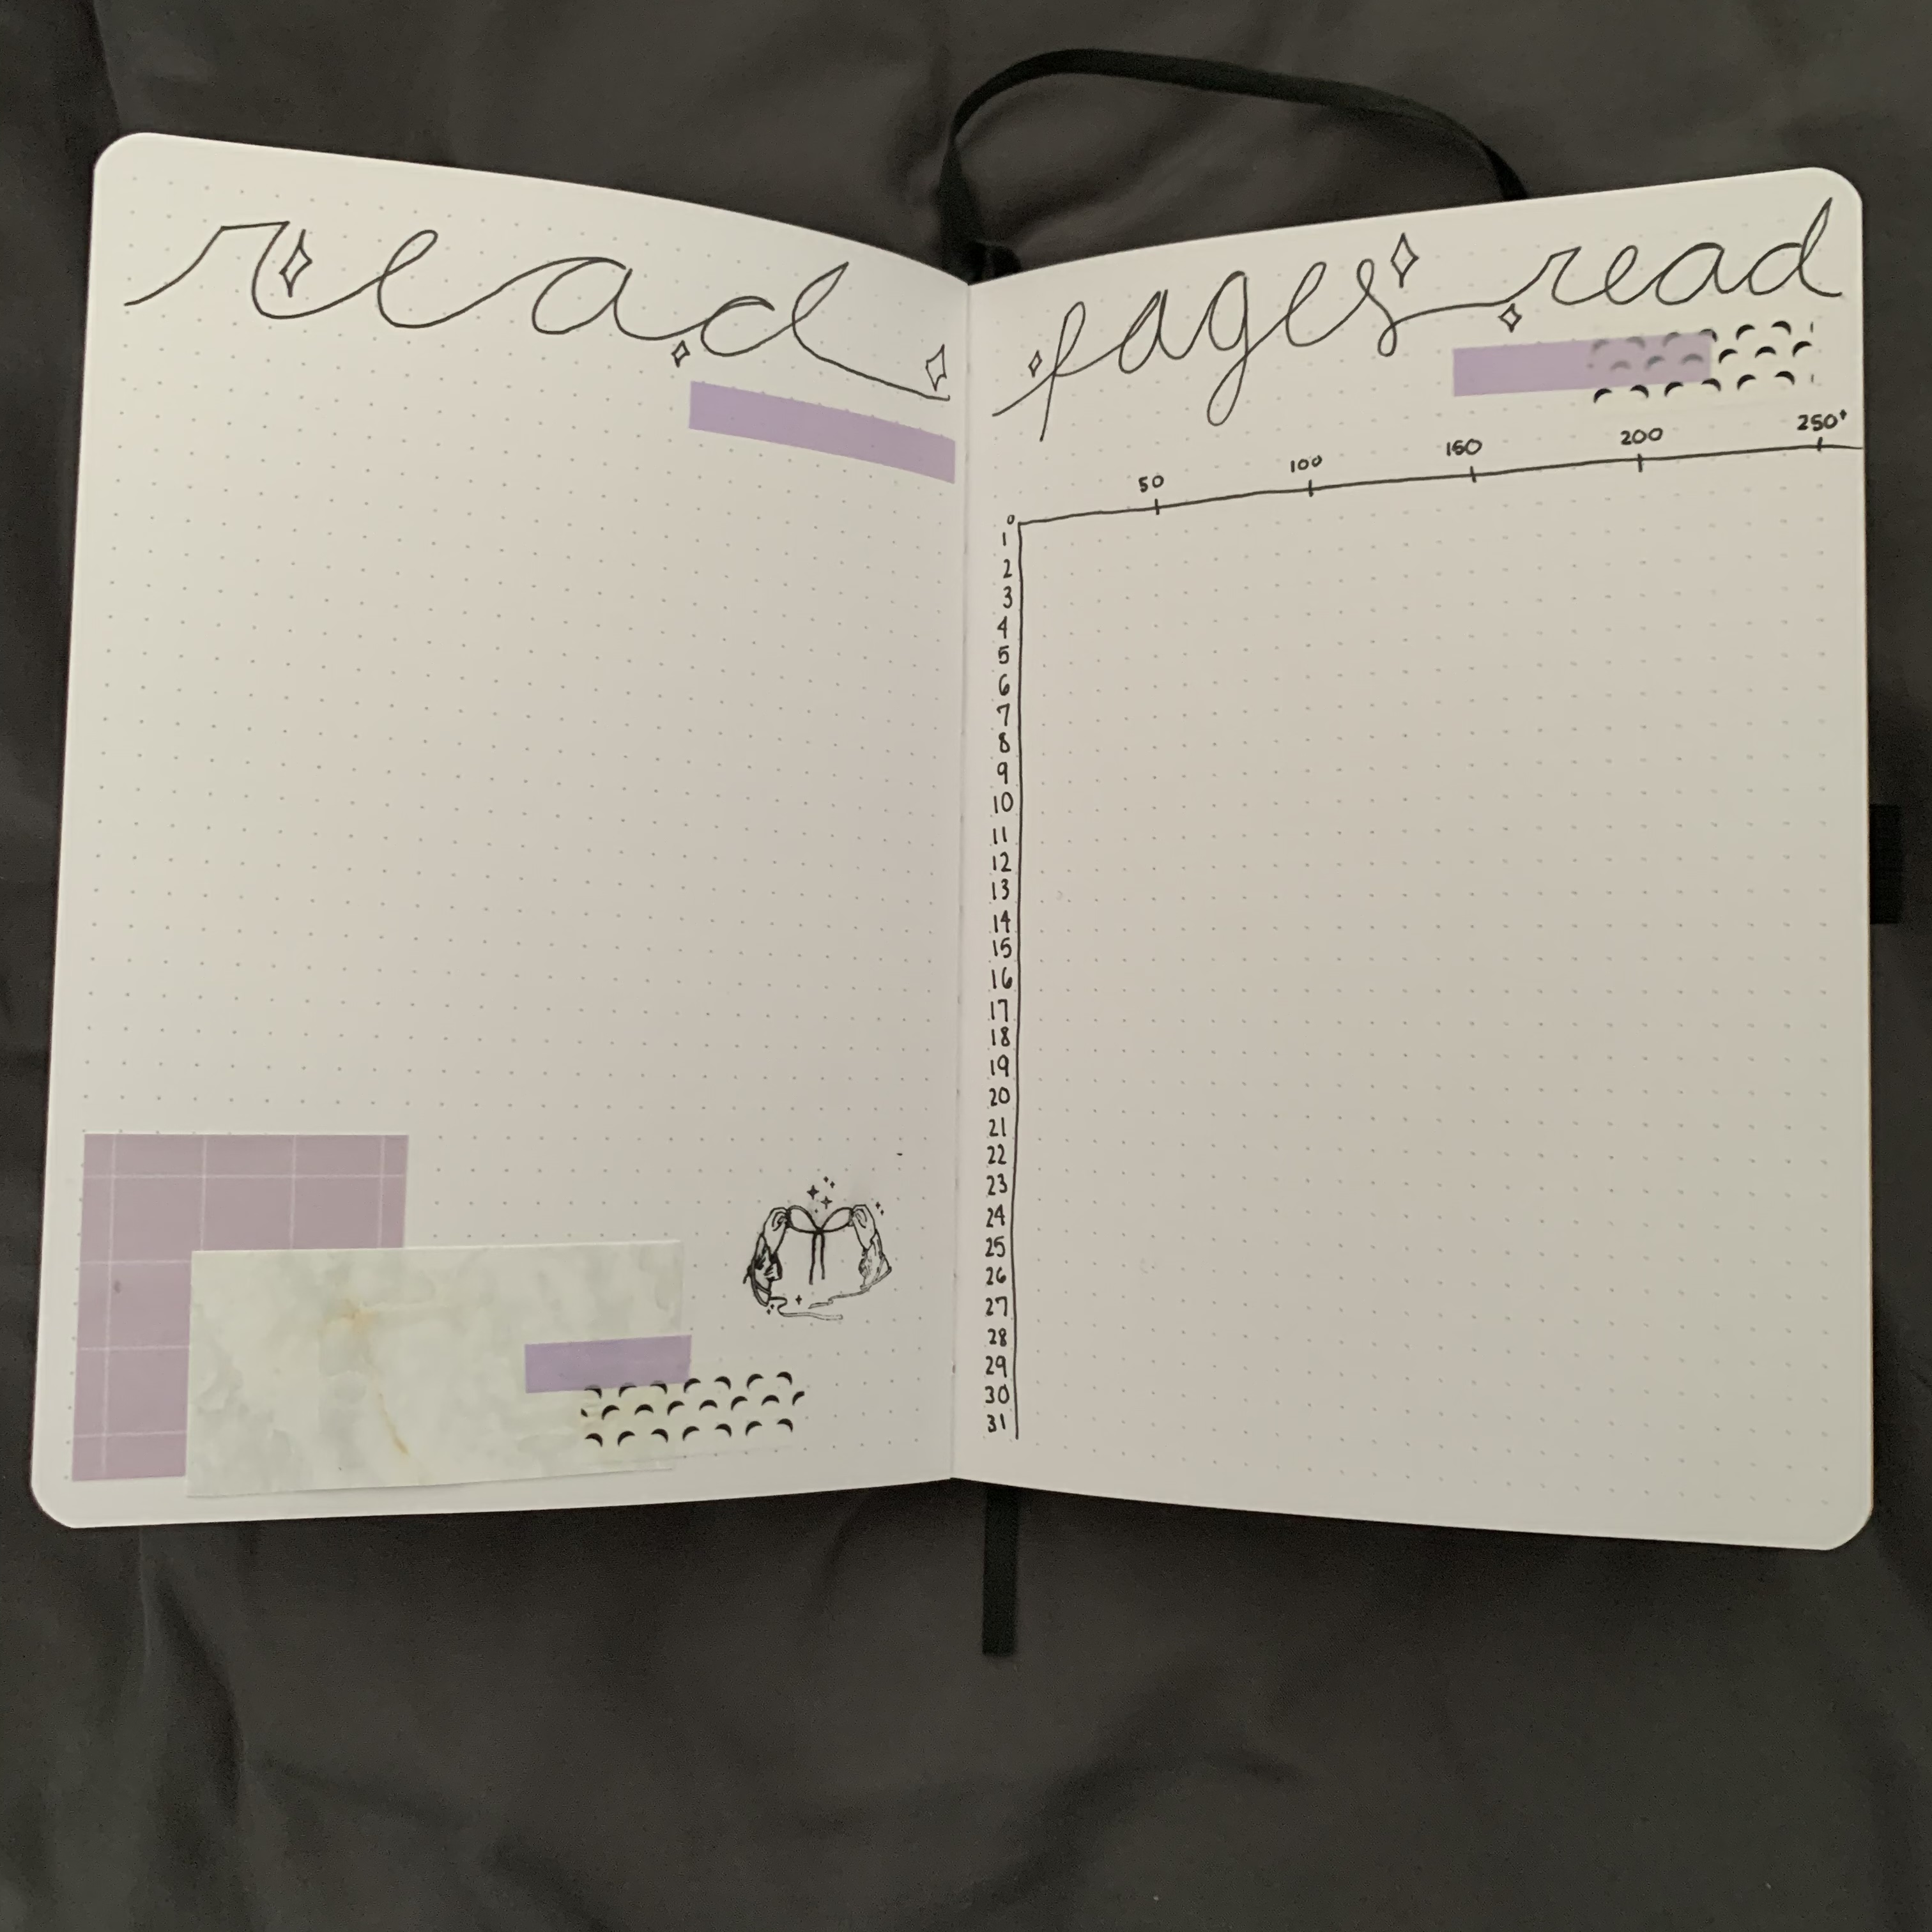 January 2021 Reading Journal - Books and Pages Read Spreads